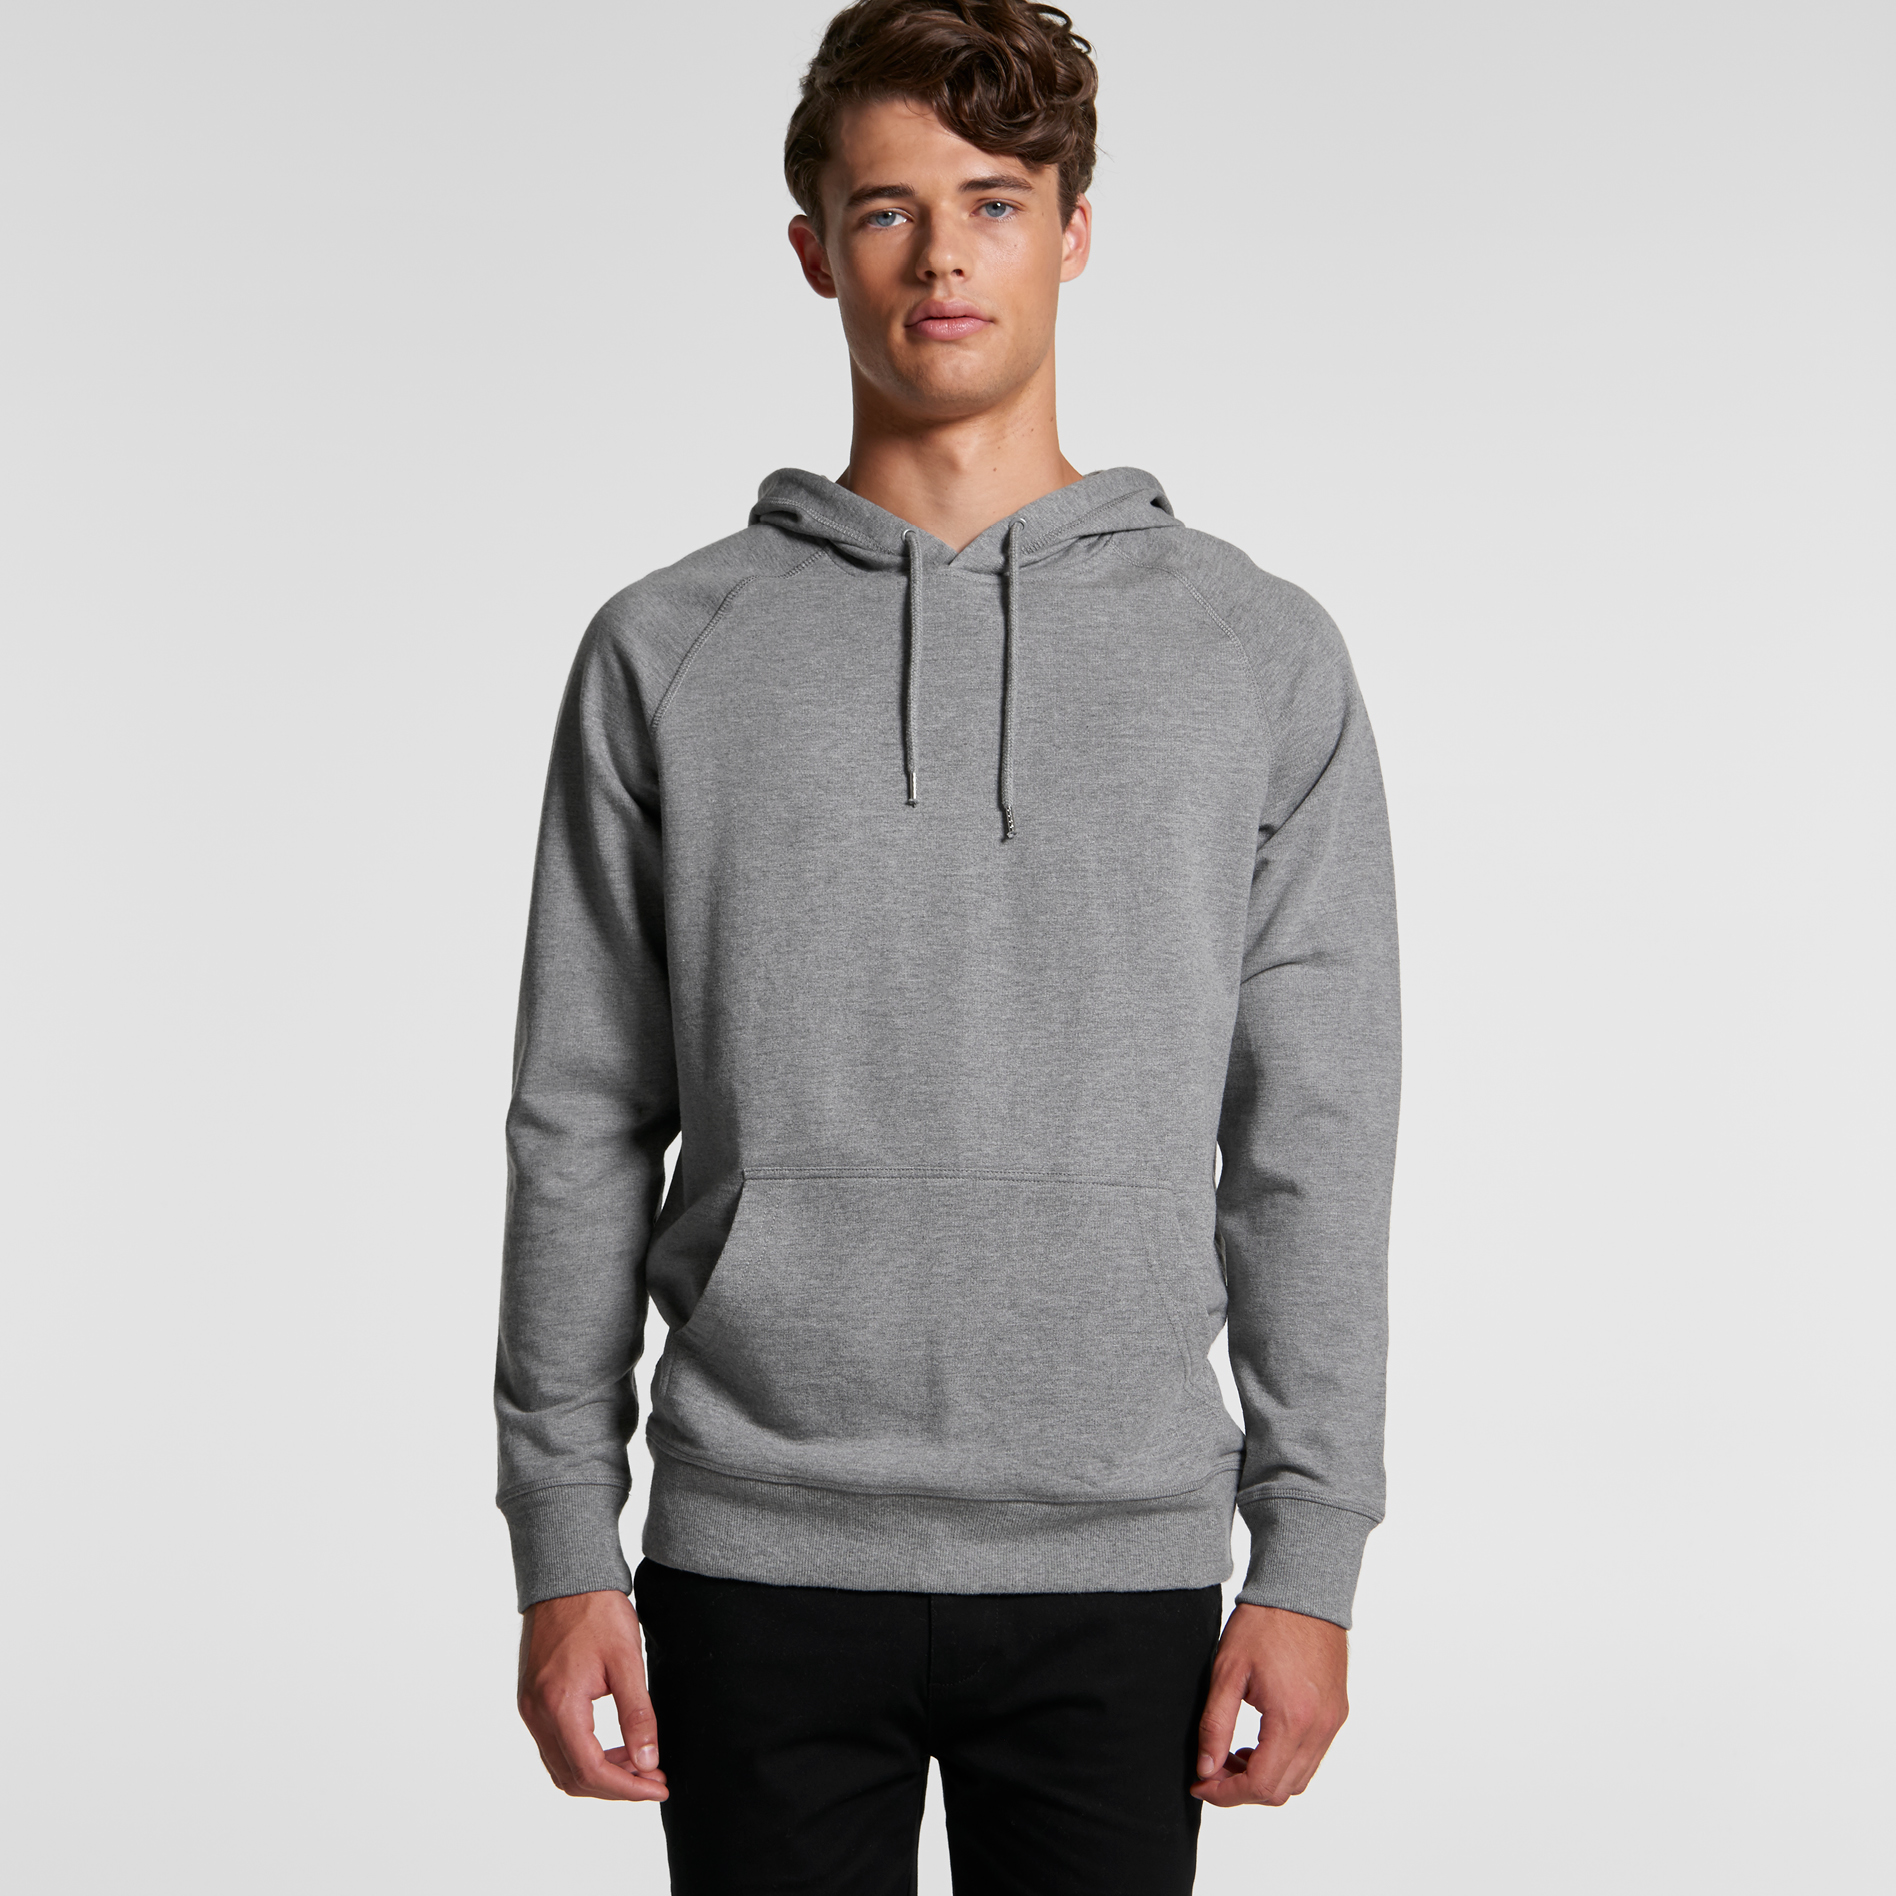 Mens Premium Hood | AS Colour | Withers and Co